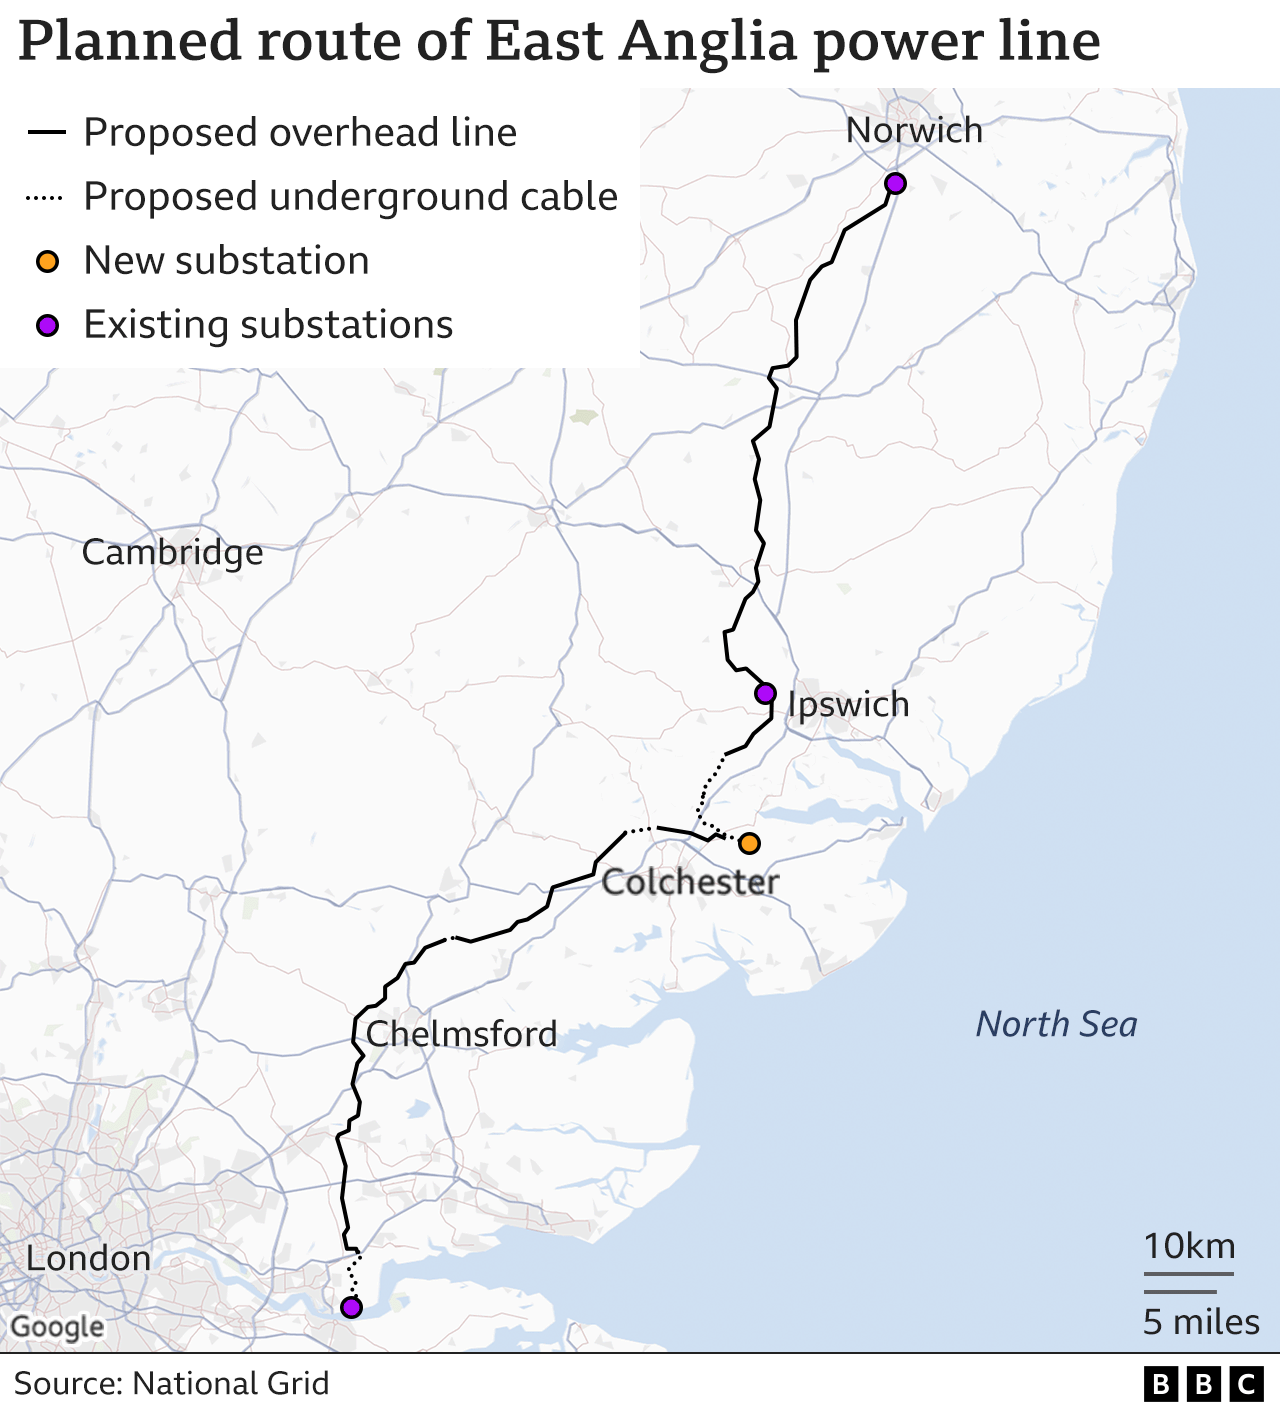  130223790 Planned Route Of East Anglia Power Line 640x2 Nc 